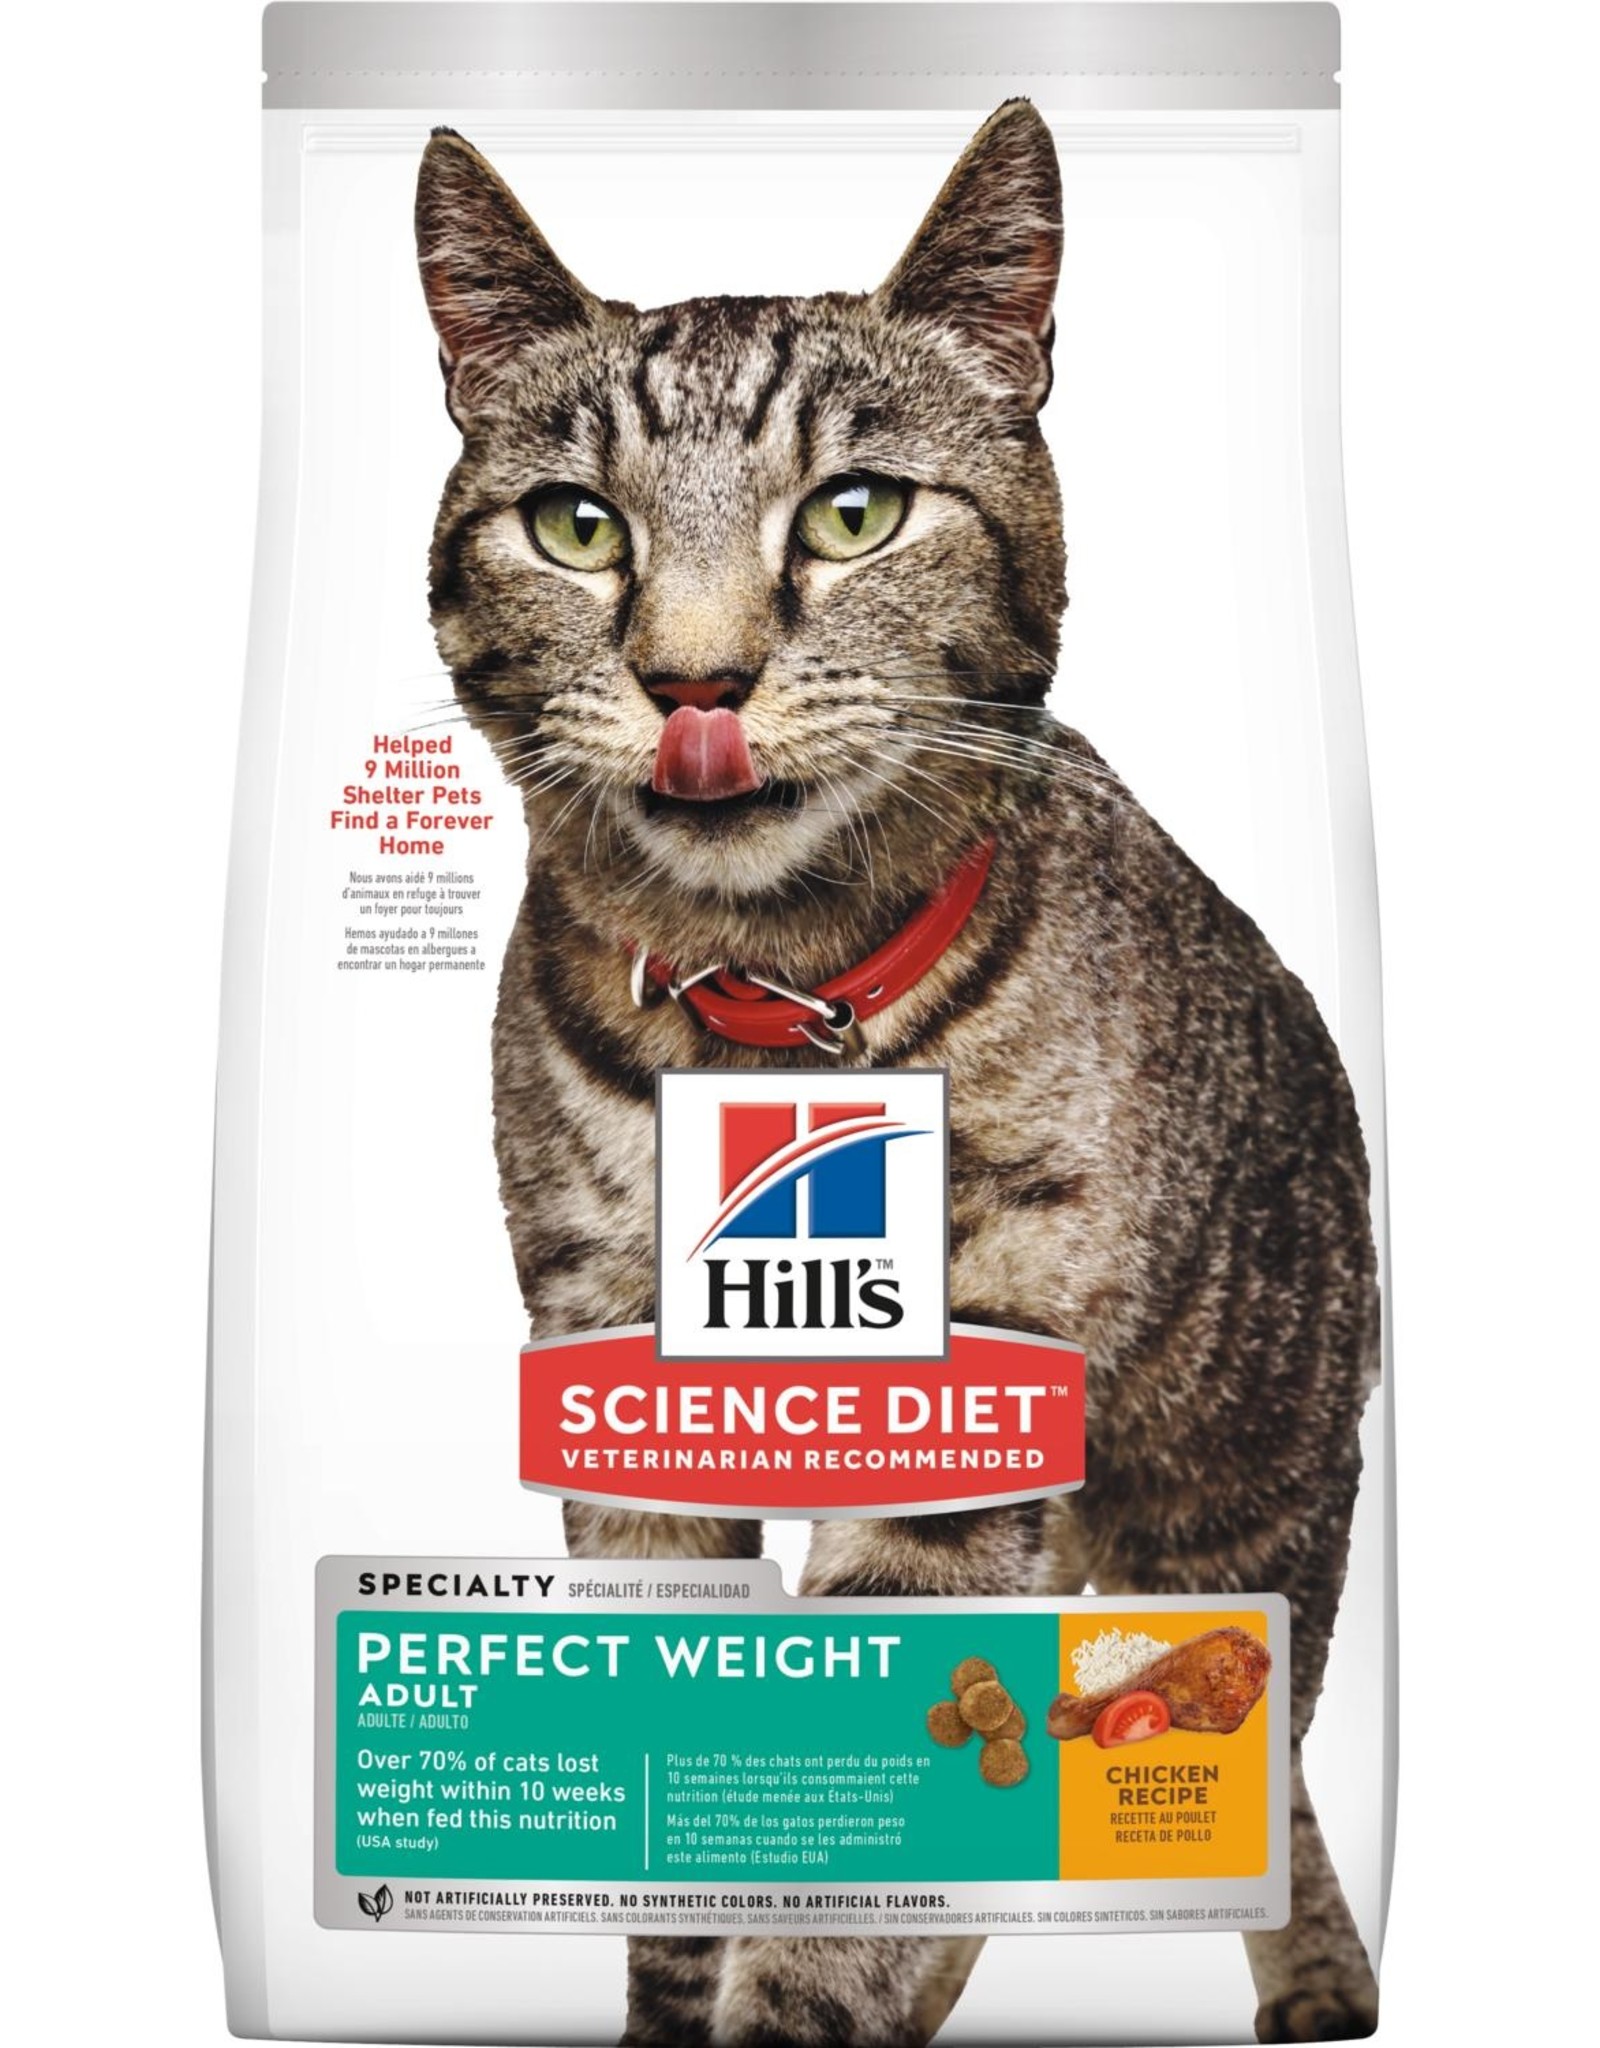 SCIENCE DIET HILL'S SCIENCE DIET FELINE ADULT PERFECT WEIGHT 15LBS